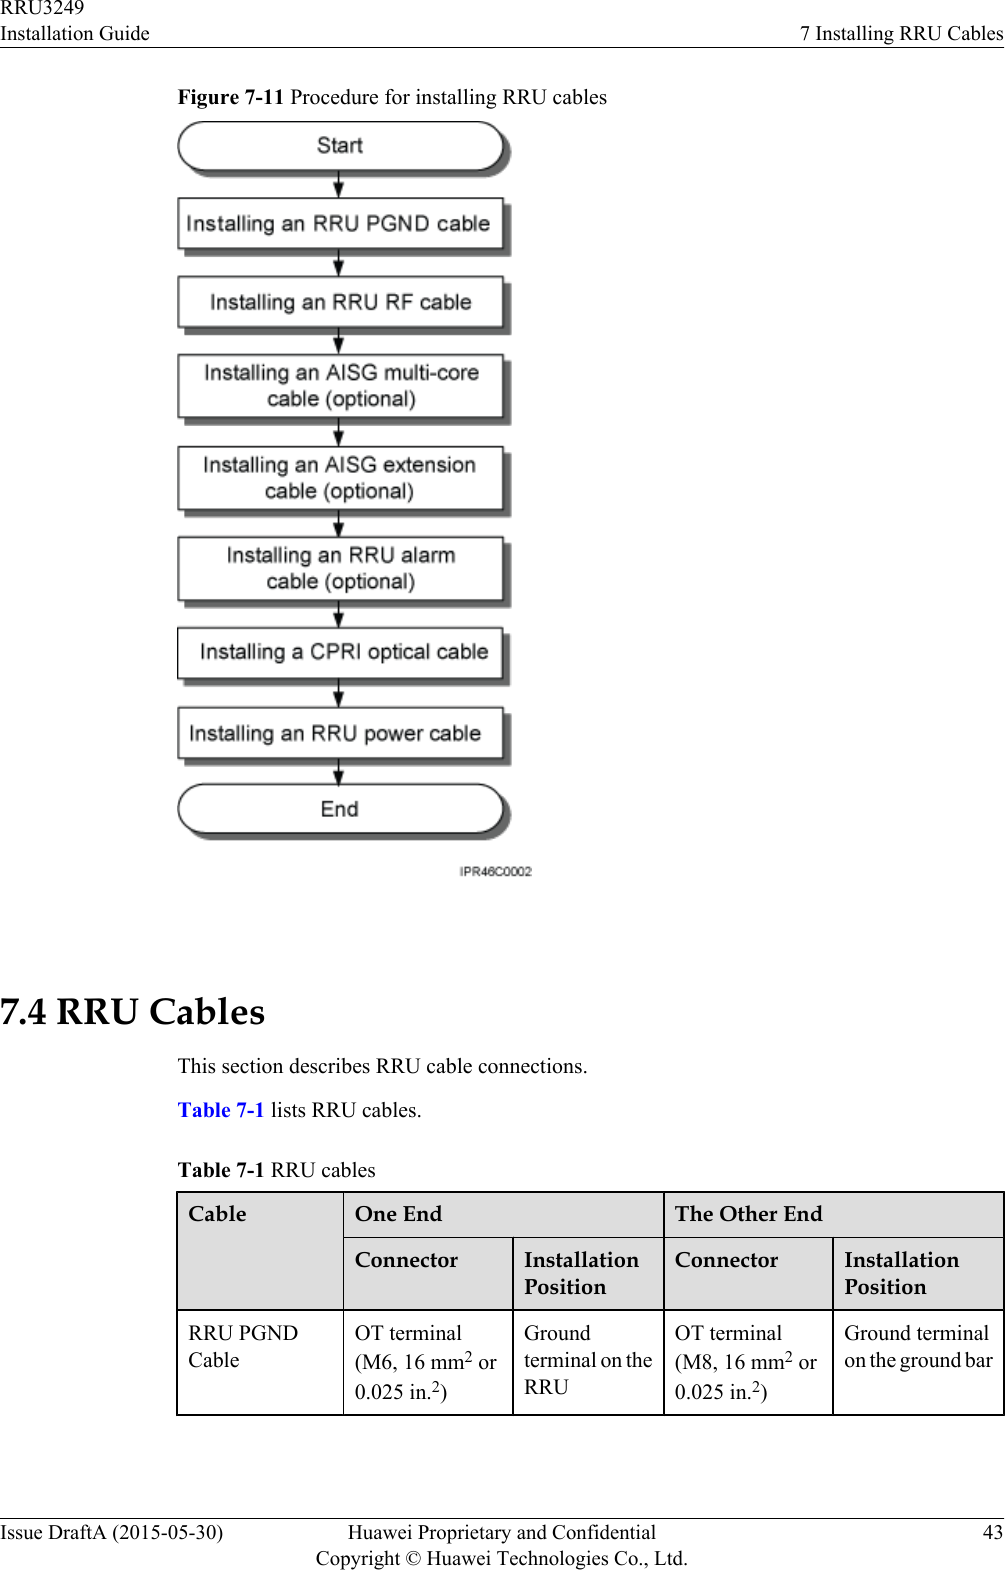 Figure 7-11 Procedure for installing RRU cables 7.4 RRU CablesThis section describes RRU cable connections.Table 7-1 lists RRU cables.Table 7-1 RRU cablesCable One End The Other EndConnector InstallationPositionConnector InstallationPositionRRU PGNDCableOT terminal(M6, 16 mm2 or0.025 in.2)Groundterminal on theRRUOT terminal(M8, 16 mm2 or0.025 in.2)Ground terminalon the ground barRRU3249Installation Guide 7 Installing RRU CablesIssue DraftA (2015-05-30) Huawei Proprietary and ConfidentialCopyright © Huawei Technologies Co., Ltd.43